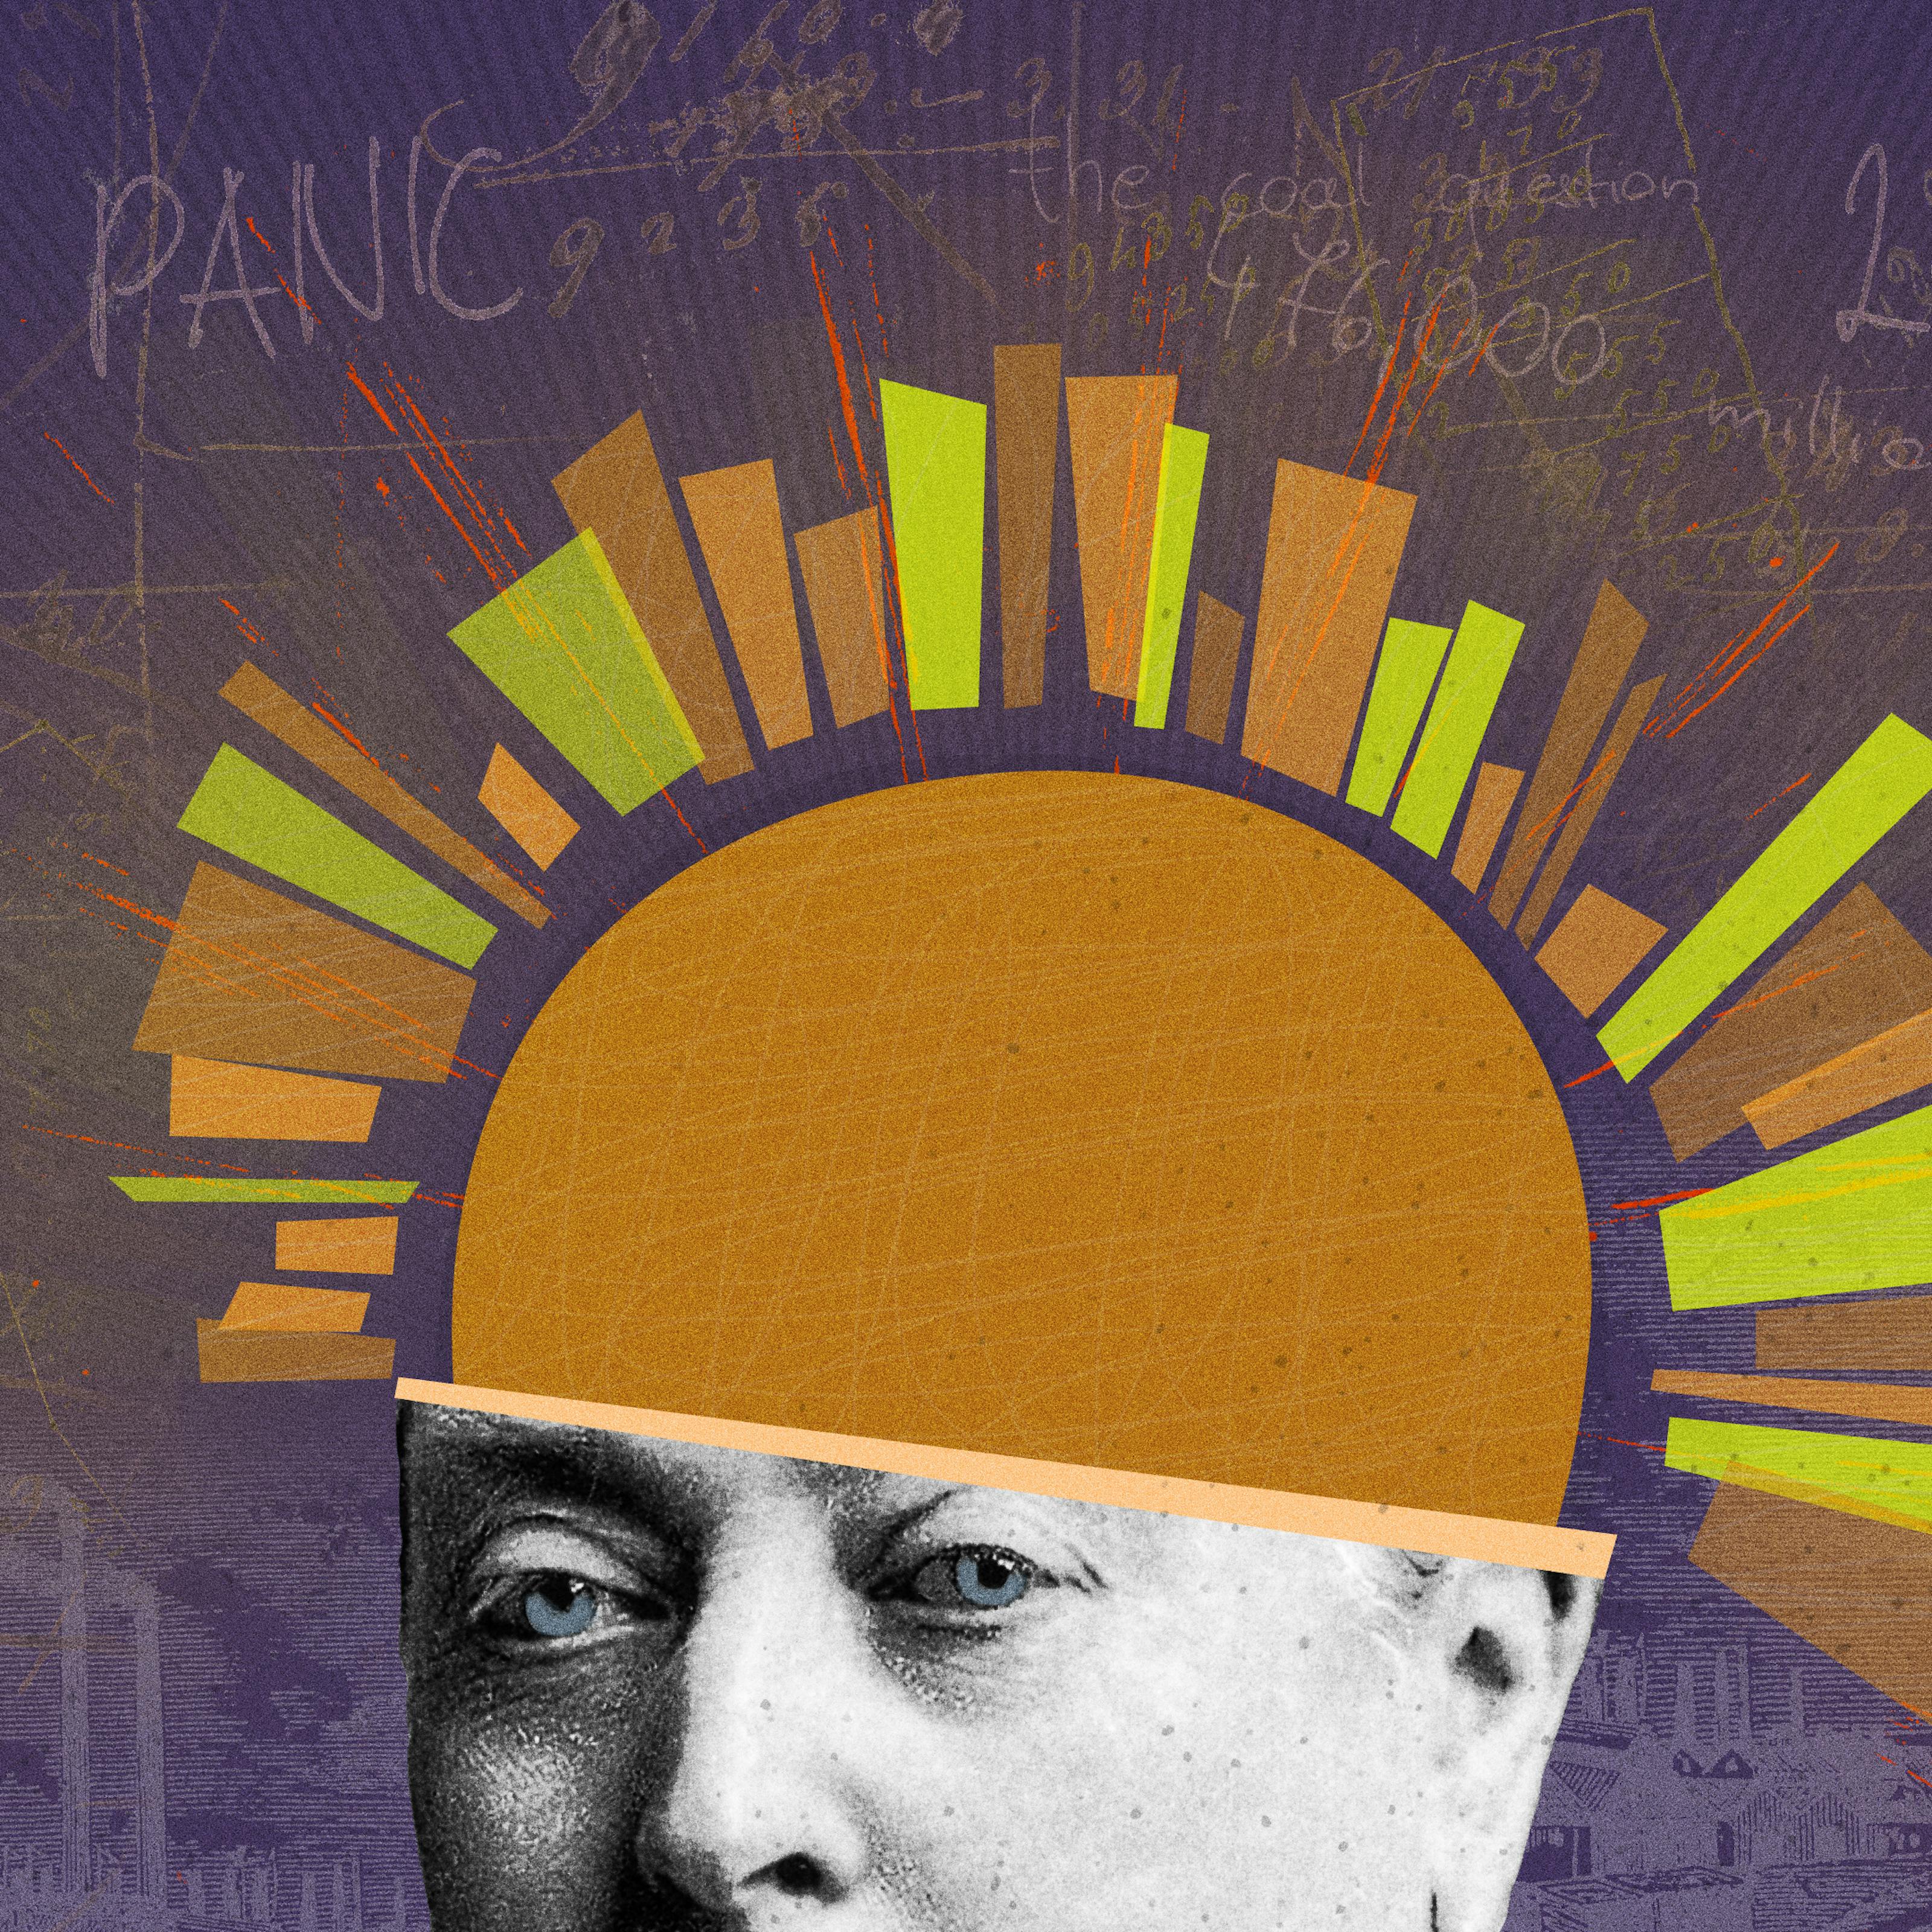 Mixed media digital artwork combining found imagery from vintage magazines and books with painted and textured elements. The overall hues are purples, oranges and yellows. The illustration is split in two by a purple and yellow line running vertically through the image at a slight angle. On the right side of this line is a black and white archive photograph of Queen Victoria looking slightly off to camera left. The top half of her head has been replaced with an orange dome representative of a sun. Her necklace has been coloured purple and the sash over her left shoulder is coloured pink. She is pictured against a purple background which is covered in hand written text and an image of the smoking chimneys of coal mined. On the left side of the vertical lines, the image of Queen Victoria is duplicated and enlarged to reveal it in more detail. Her blue eyes can now be seen and there are yellow and orange rays emanating from the sun.